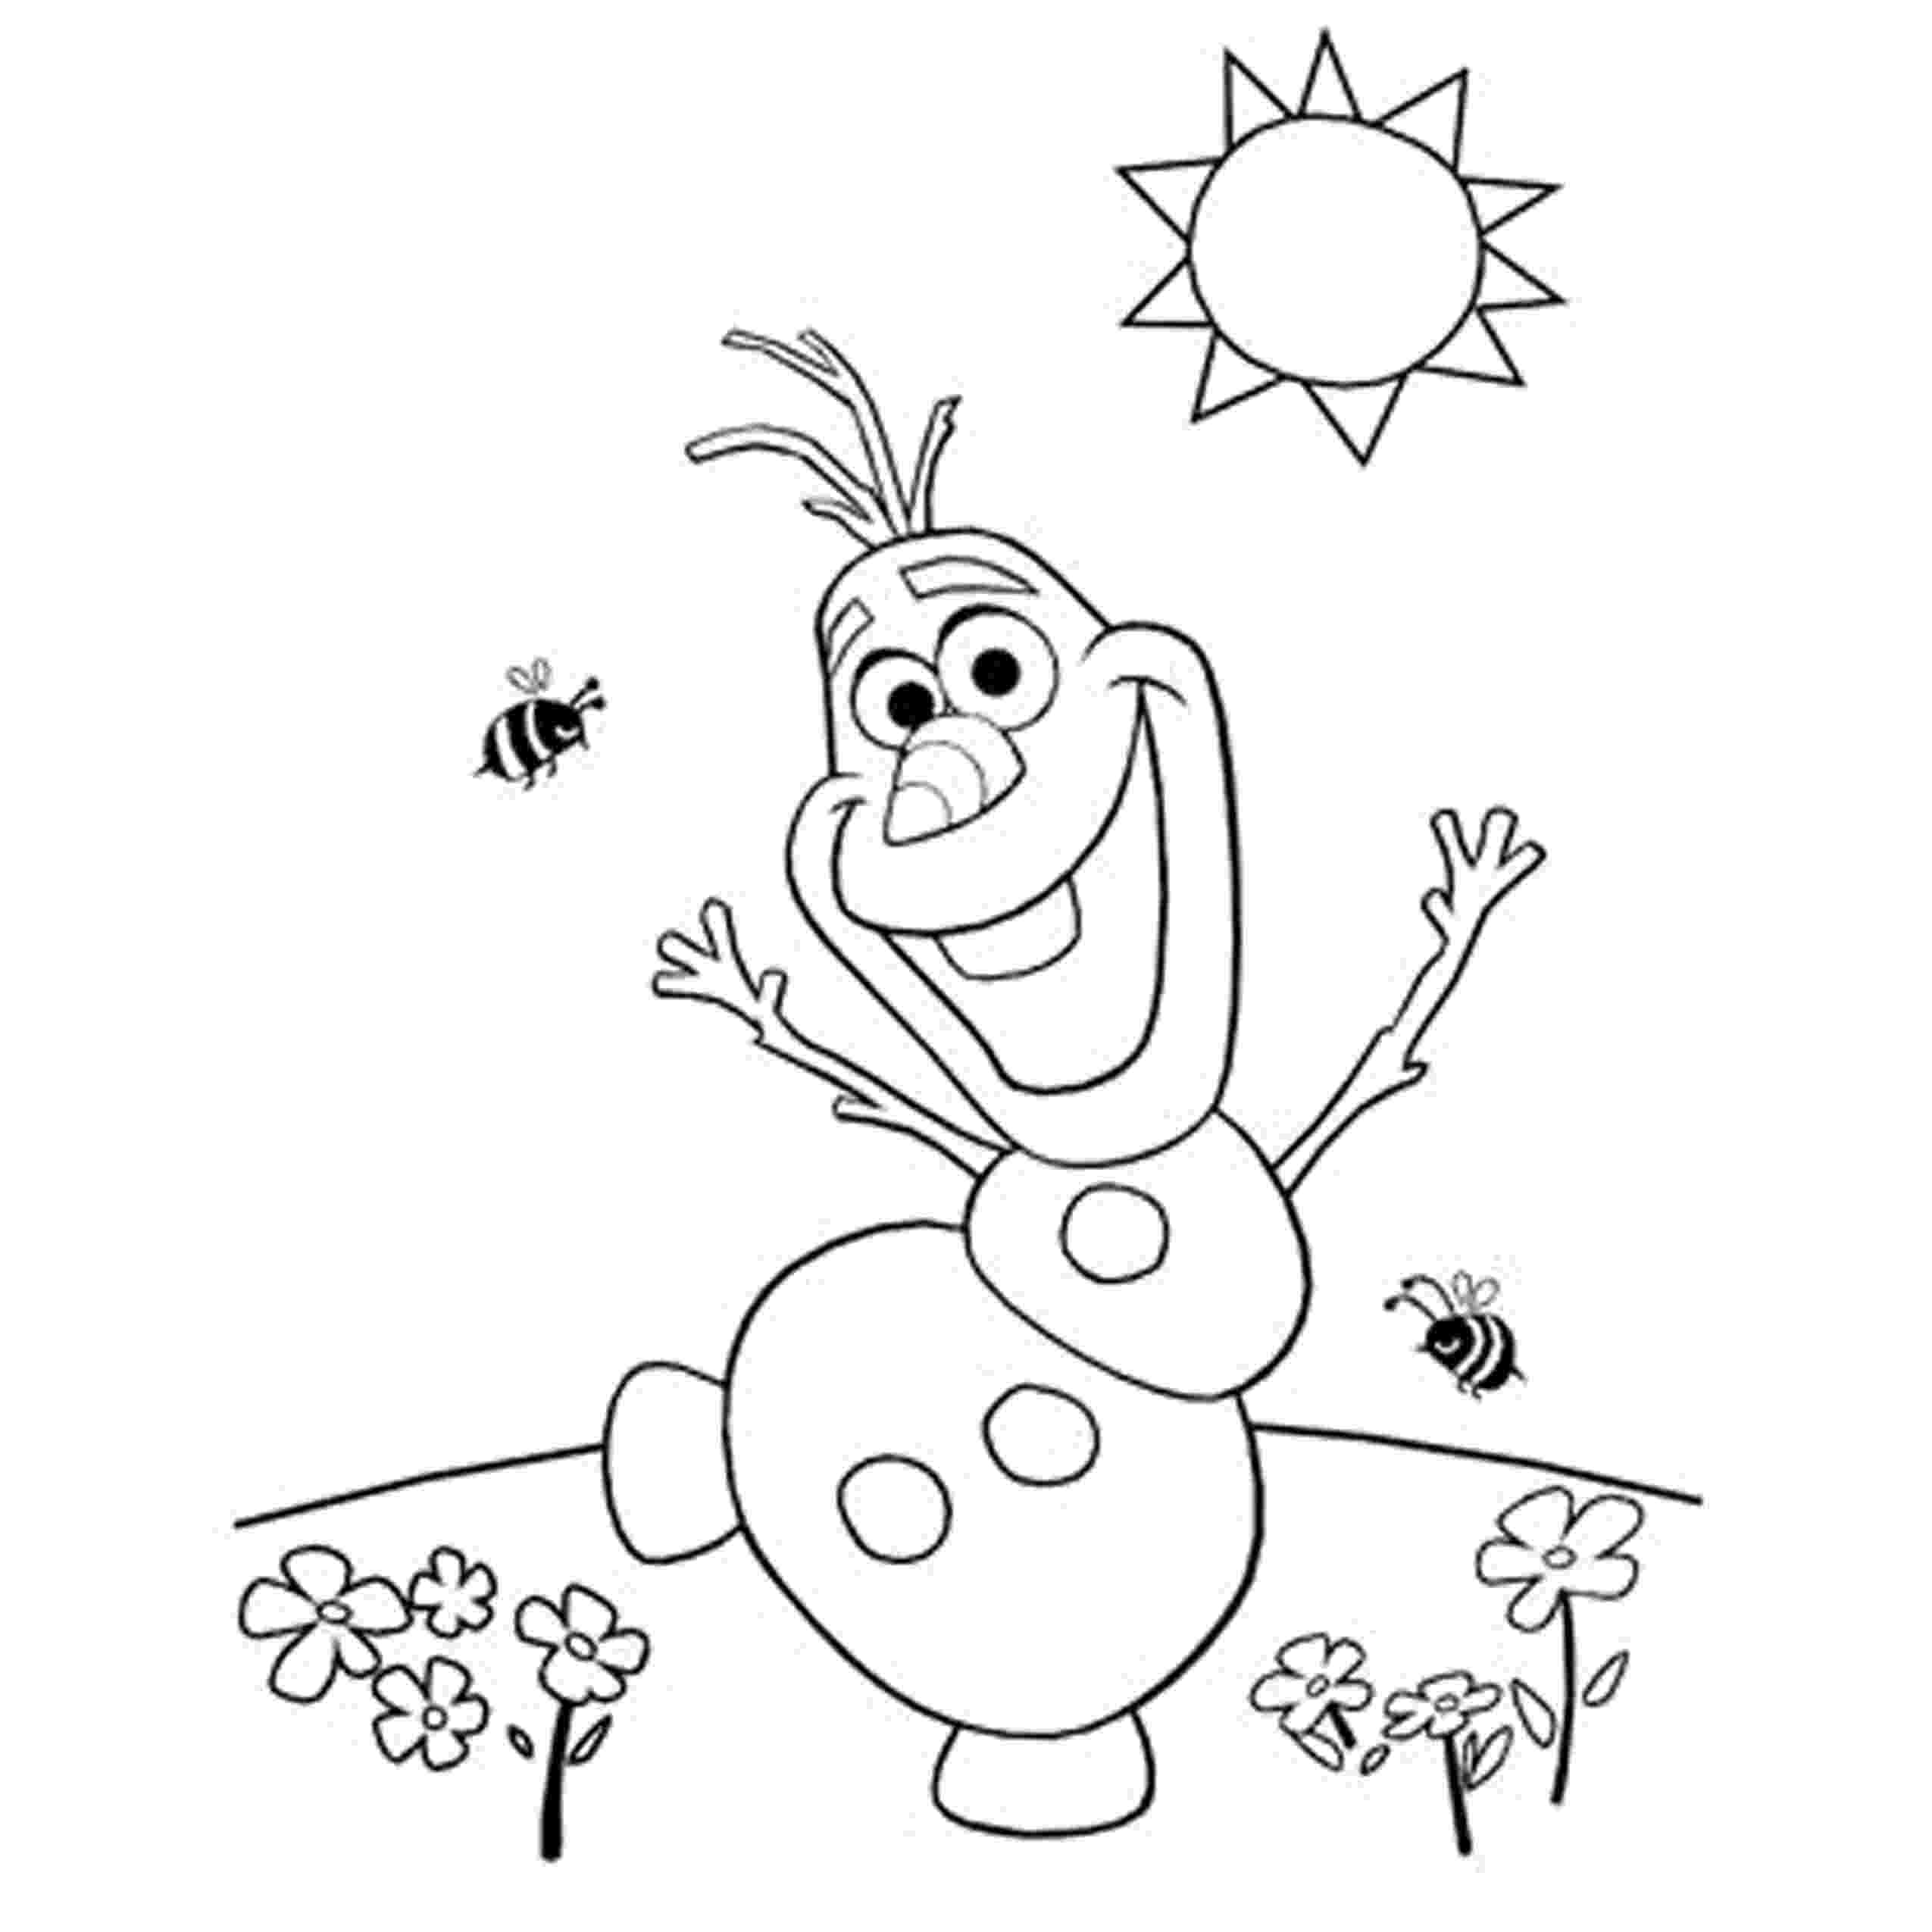 frozen coloring pages free free printable frozen coloring pages for kids best coloring frozen free pages 1 1